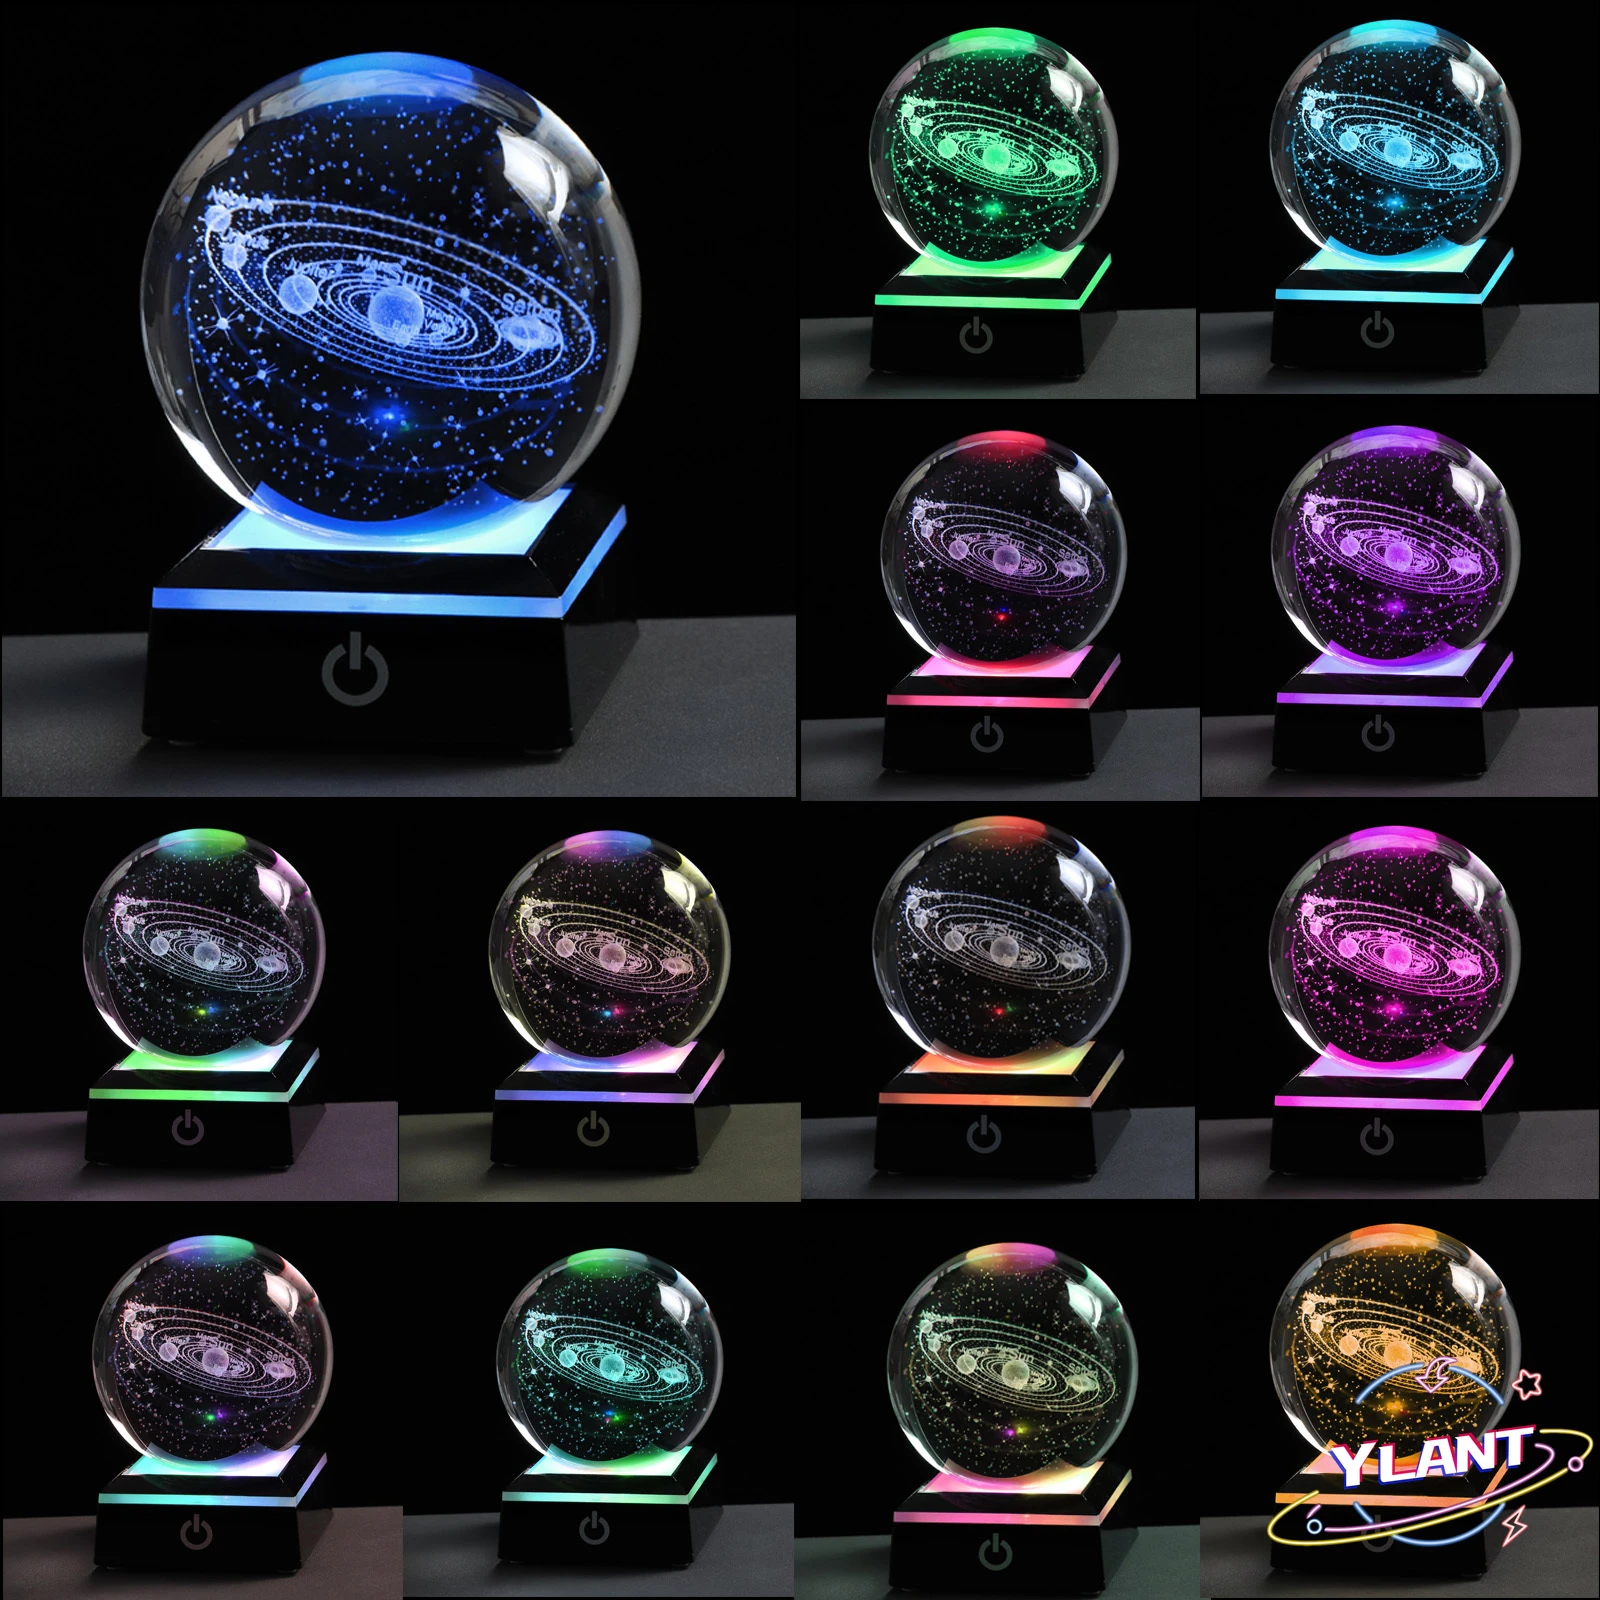 New 80mm K9 Crystal Solar System Planet Globe 3D Laser Engraved Sun System  Ball with Touch Switch LED Light Base Astronomy Gifts|Decorative Balls| -  AliExpress